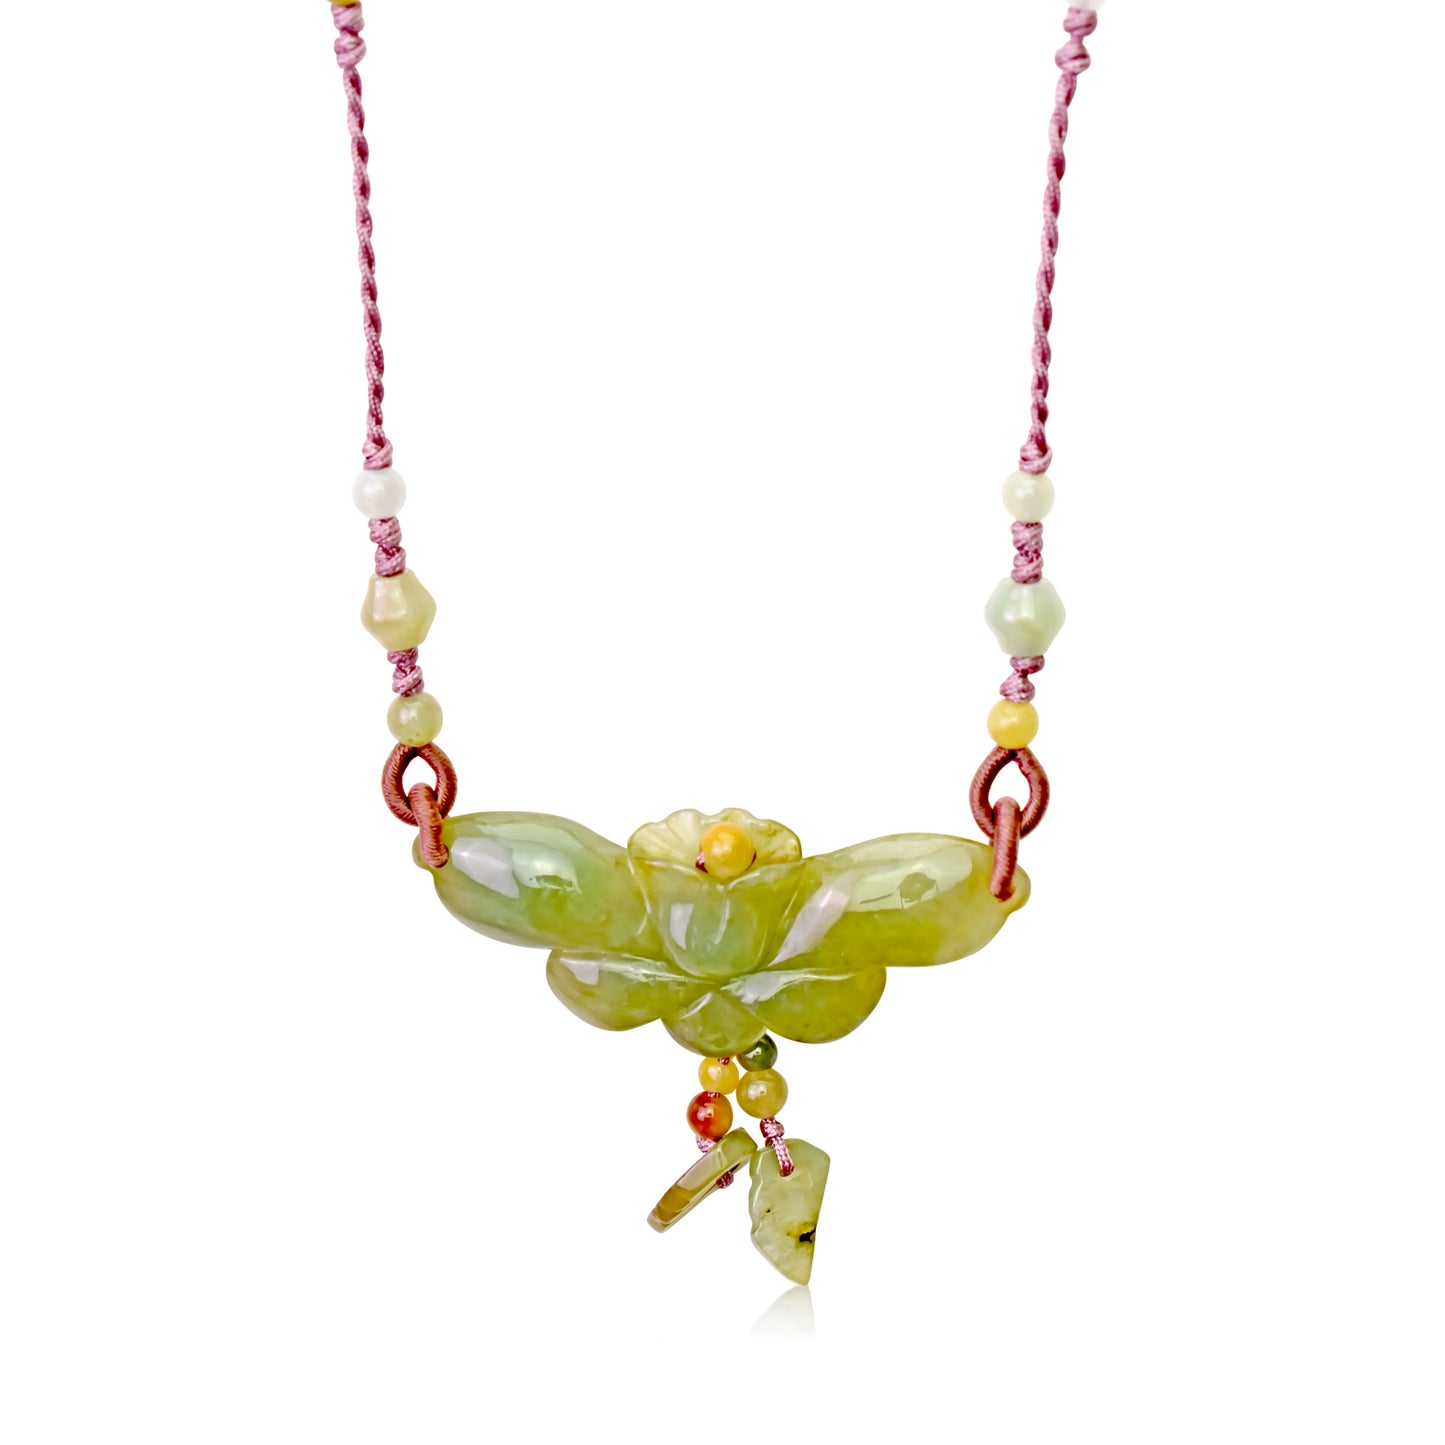 Look Refresh with the Butterfly Orchid Jade Necklace made with Lavender Cord